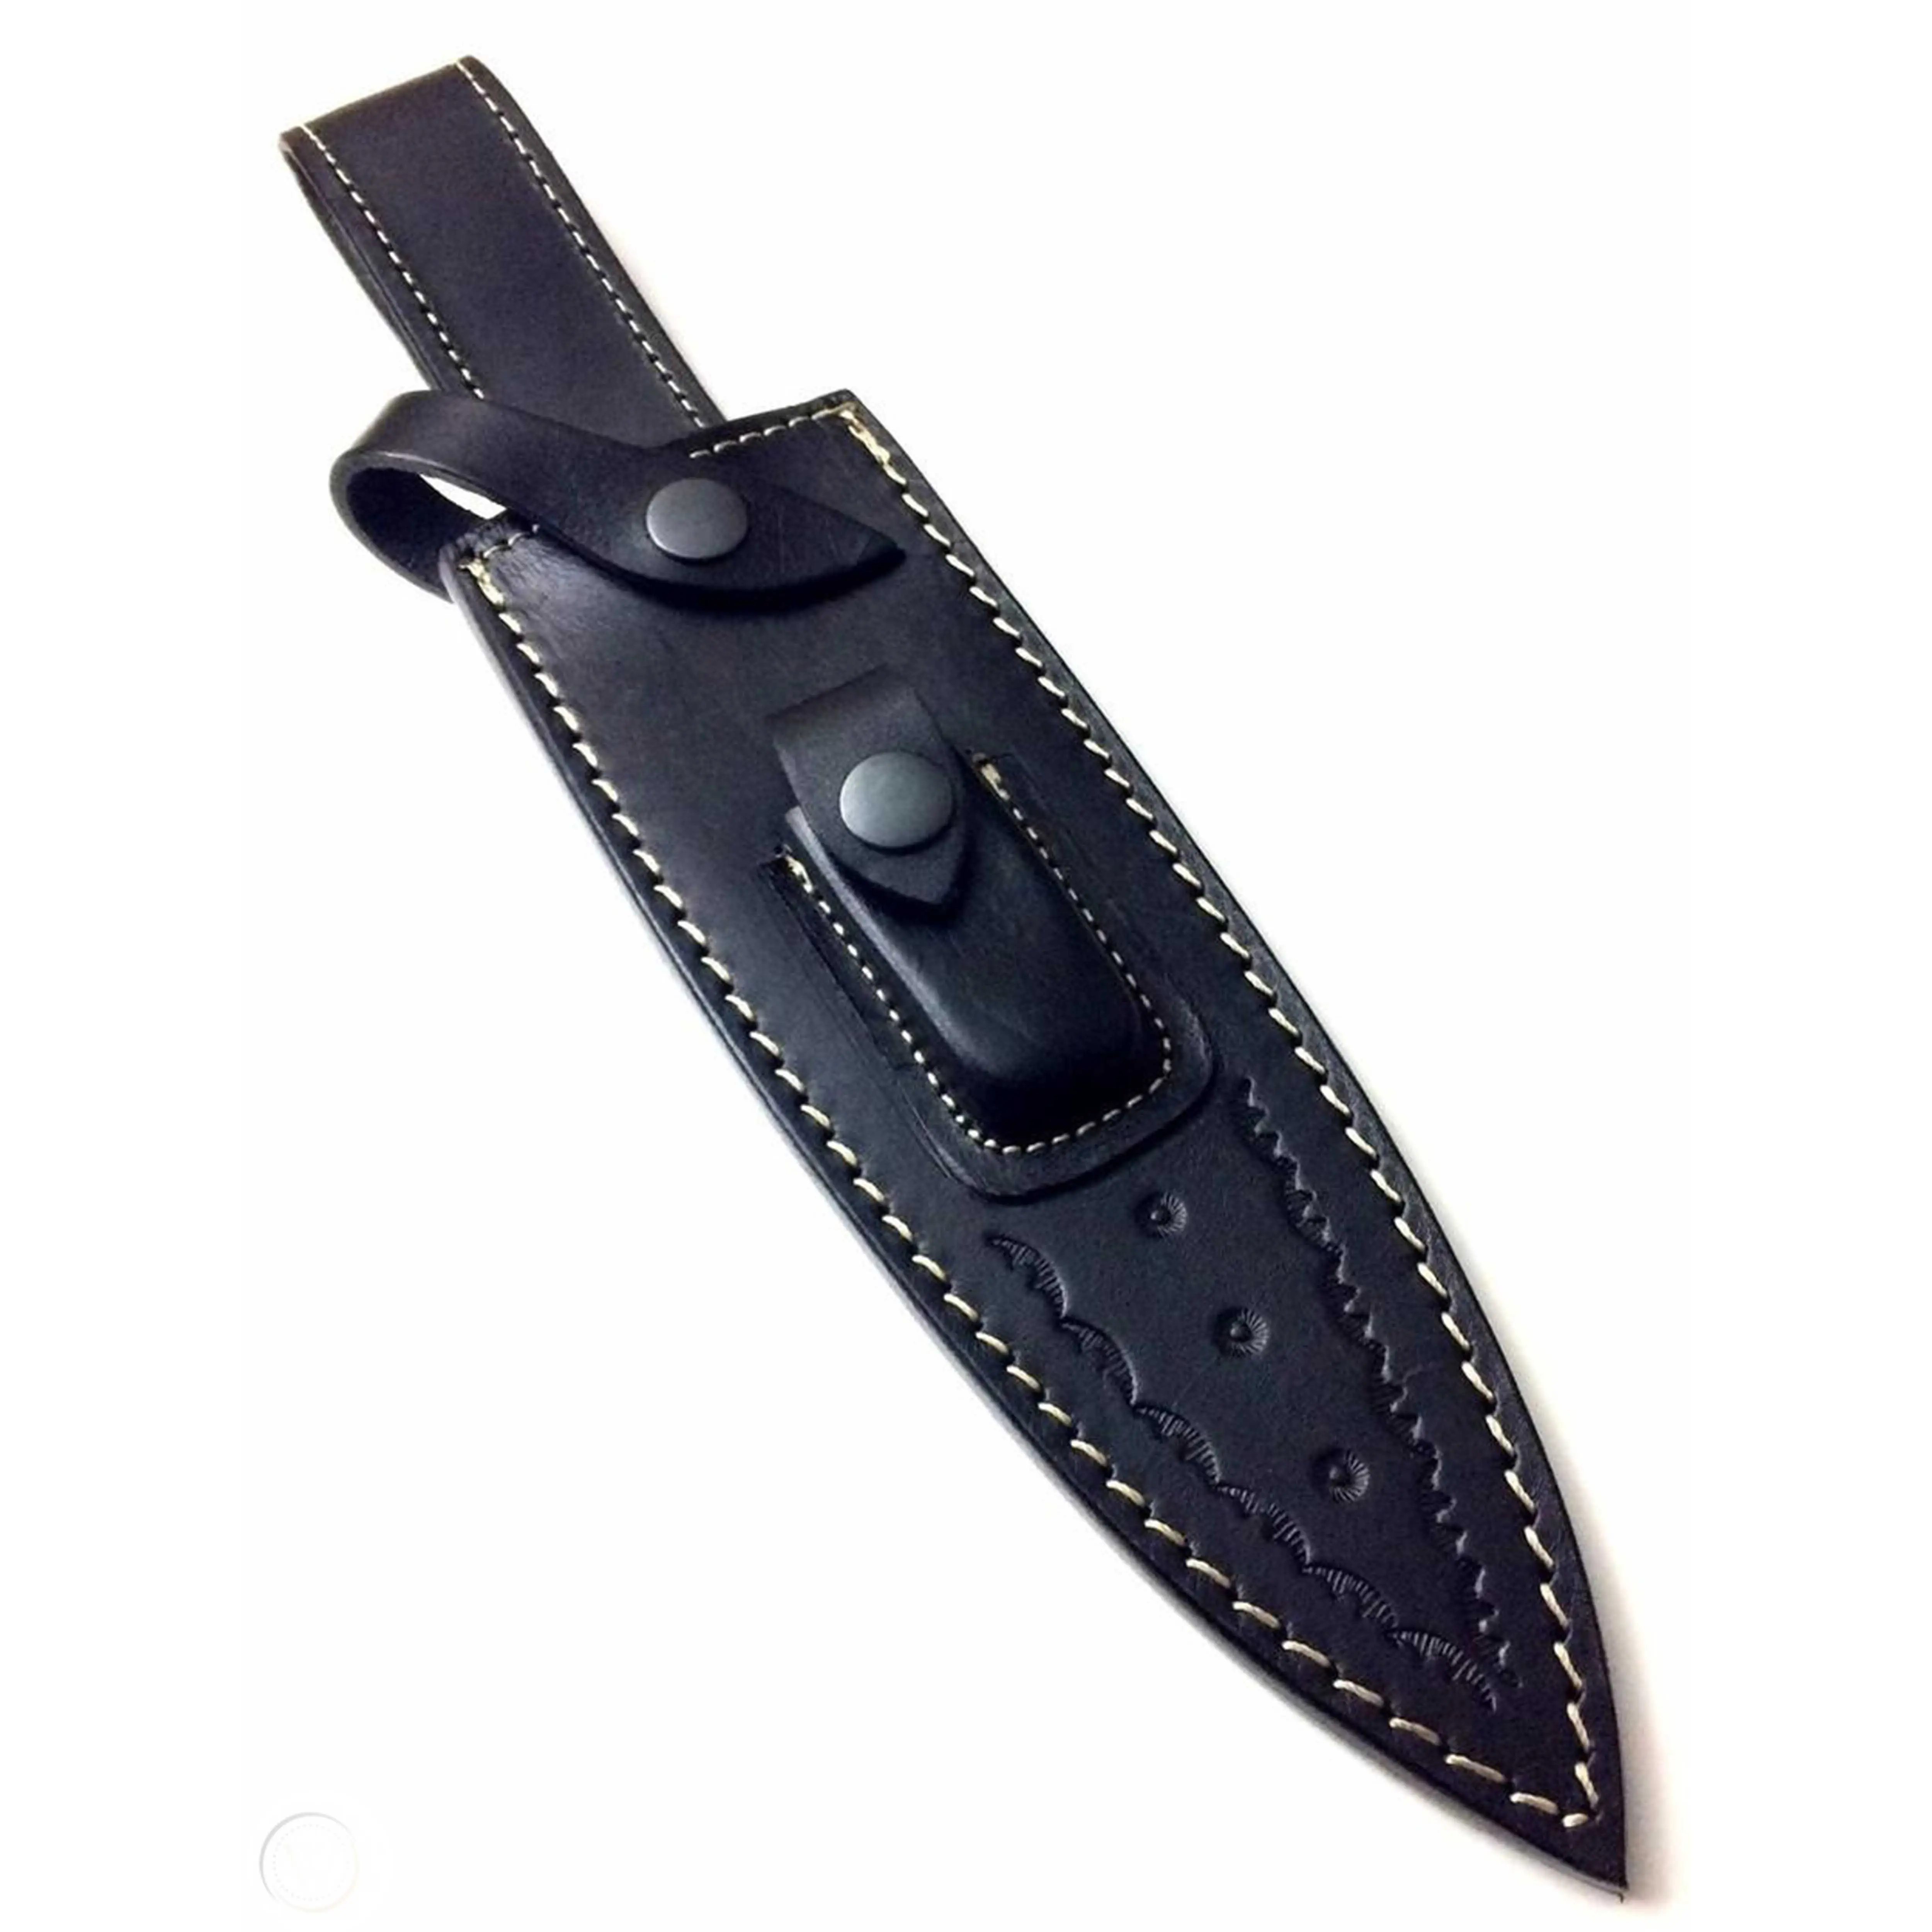 OEM Product 2021 Hot Selling Rich Grain front box Leather Sheath for fixed Blade Double Edge Knives